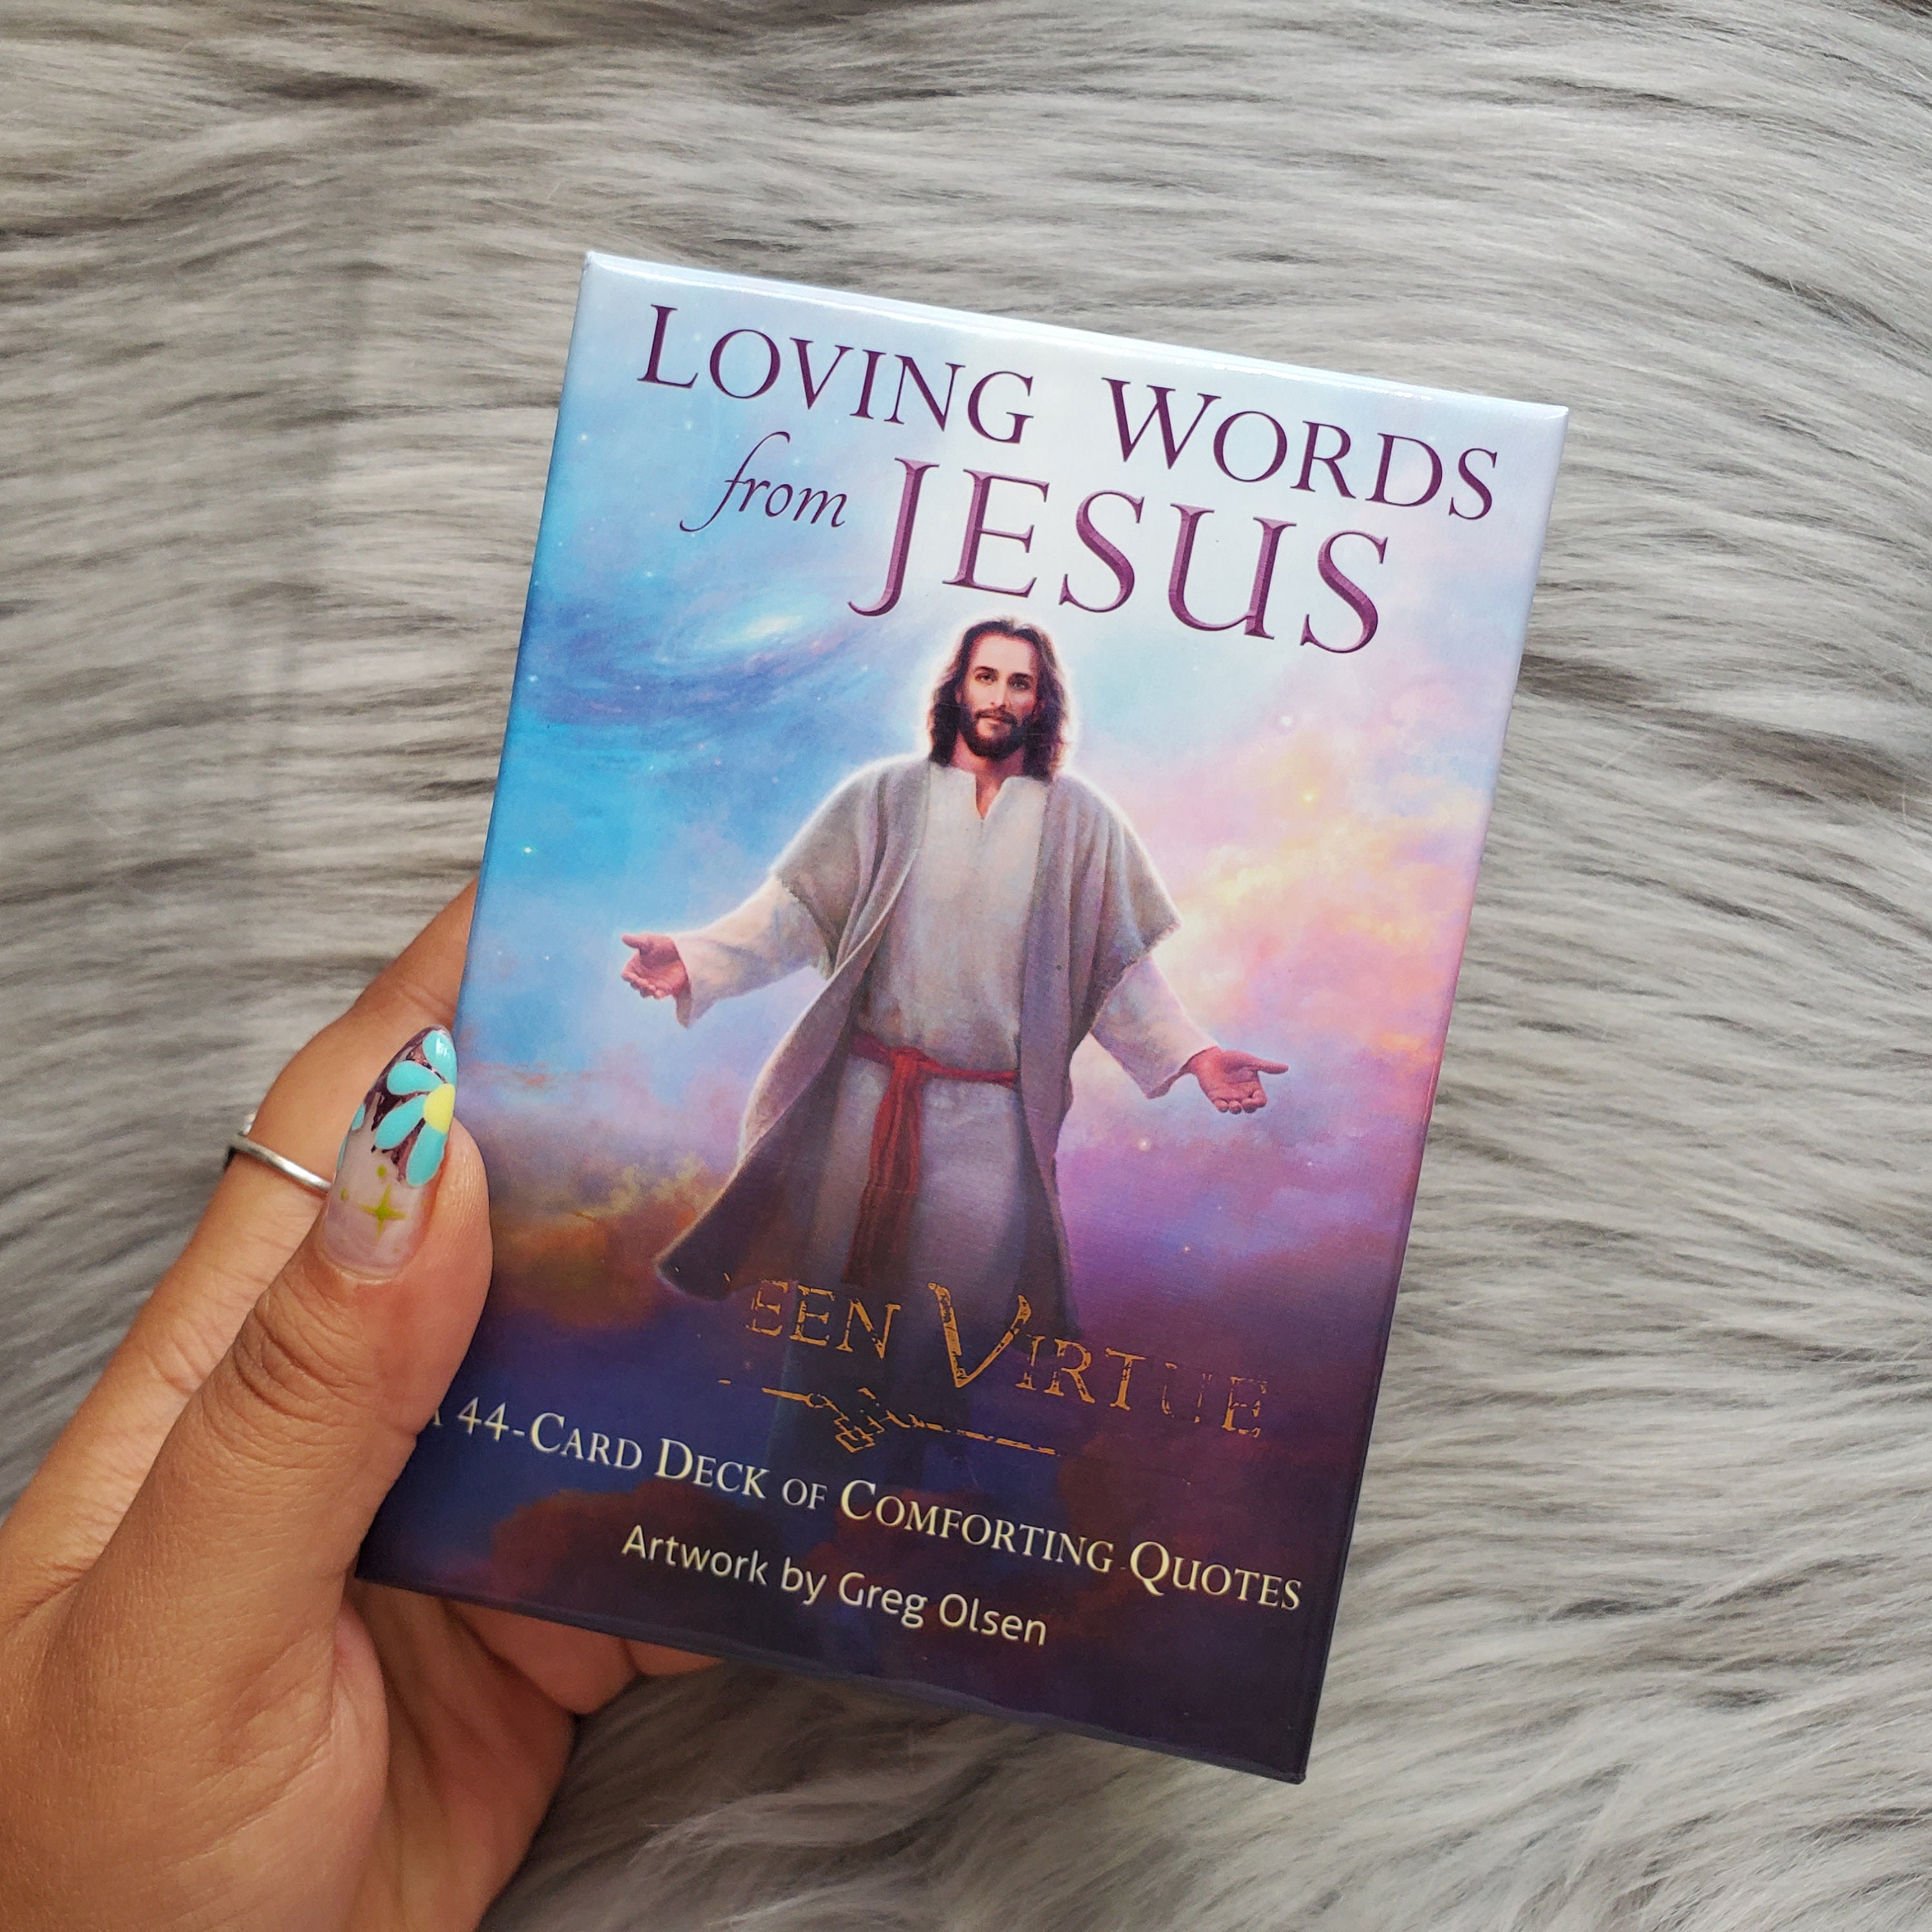 Loving Words From Jesus by Doreen Virtue, 44 Card Deck With